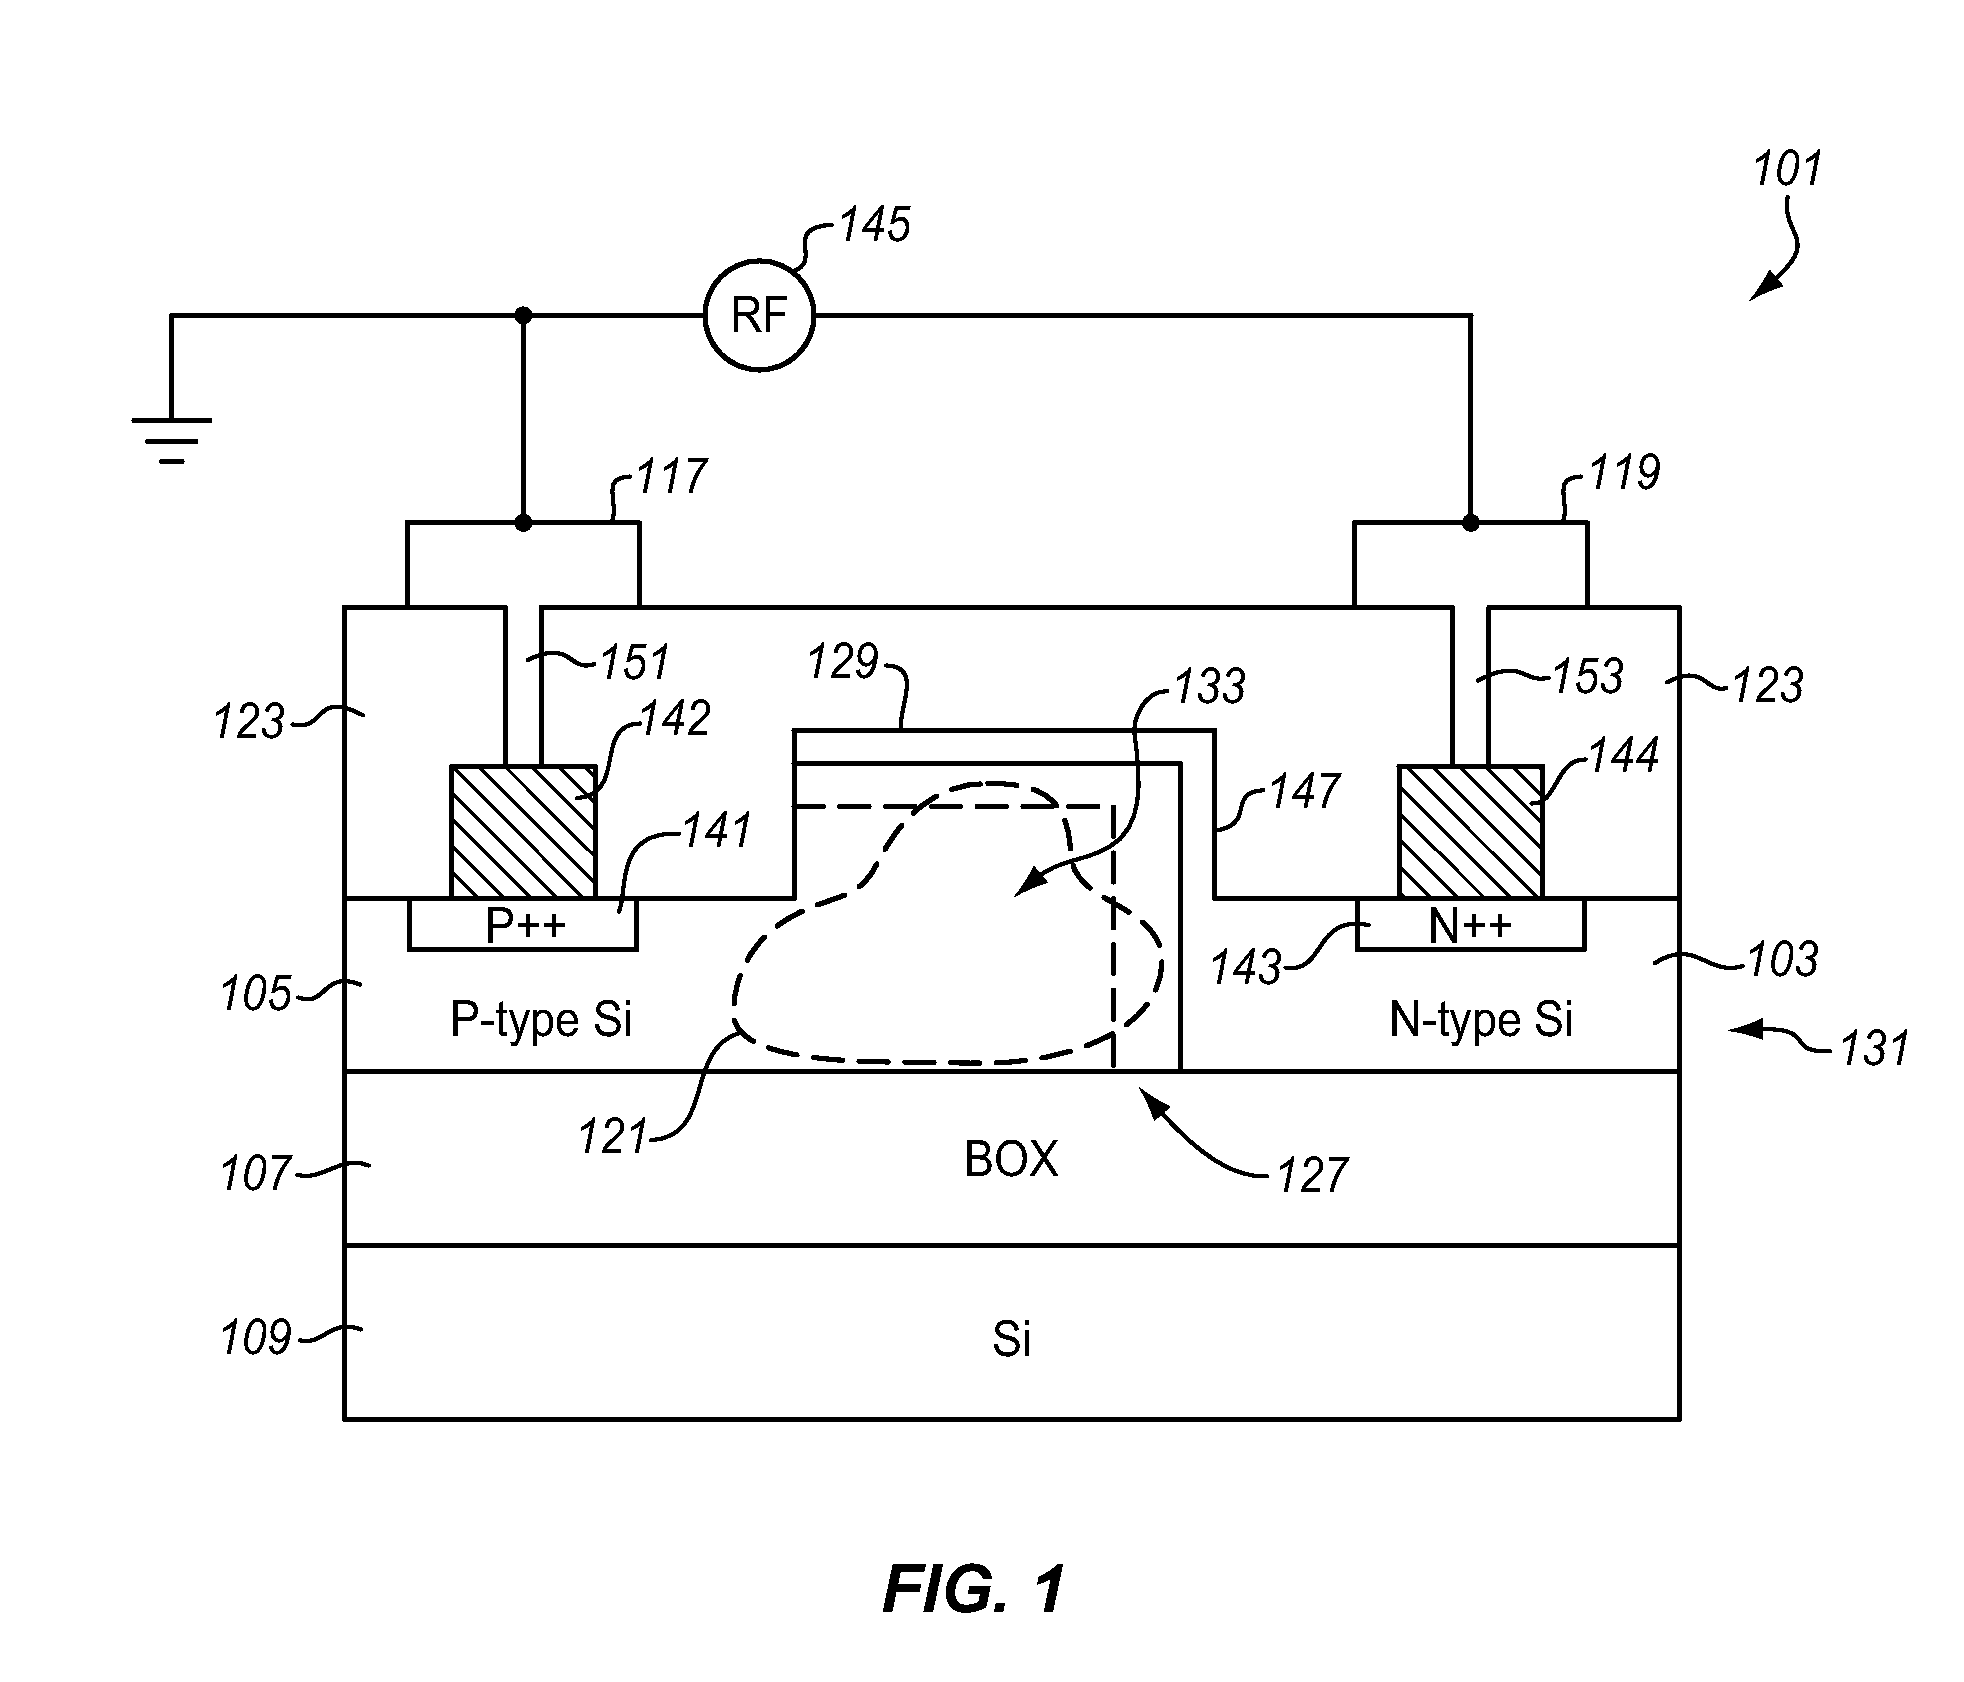 Method and Apparatus for High Speed Silicon Optical Modulation Using PN Diode